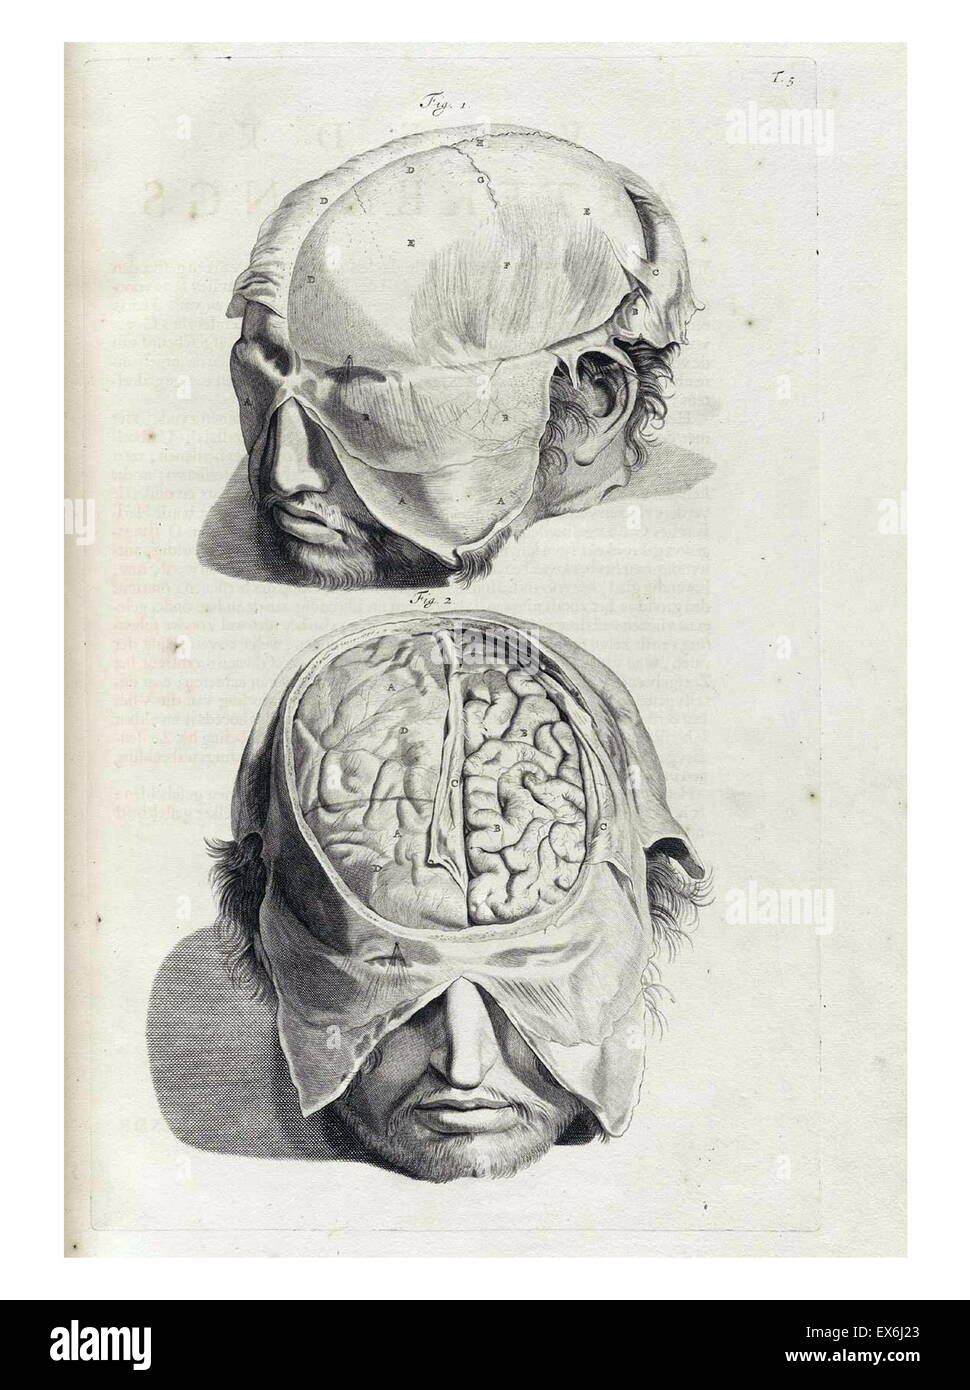 Illustrations by Govard Bidloo, from the anatomy textbook 'Ontleding des menschelyken Lichaams'. (Amsterdam 1690).Govard Bidloo was born in Amsterdam in 1649 and became professor of anatomy at The Hague from 1688 to 1712 Stock Photo